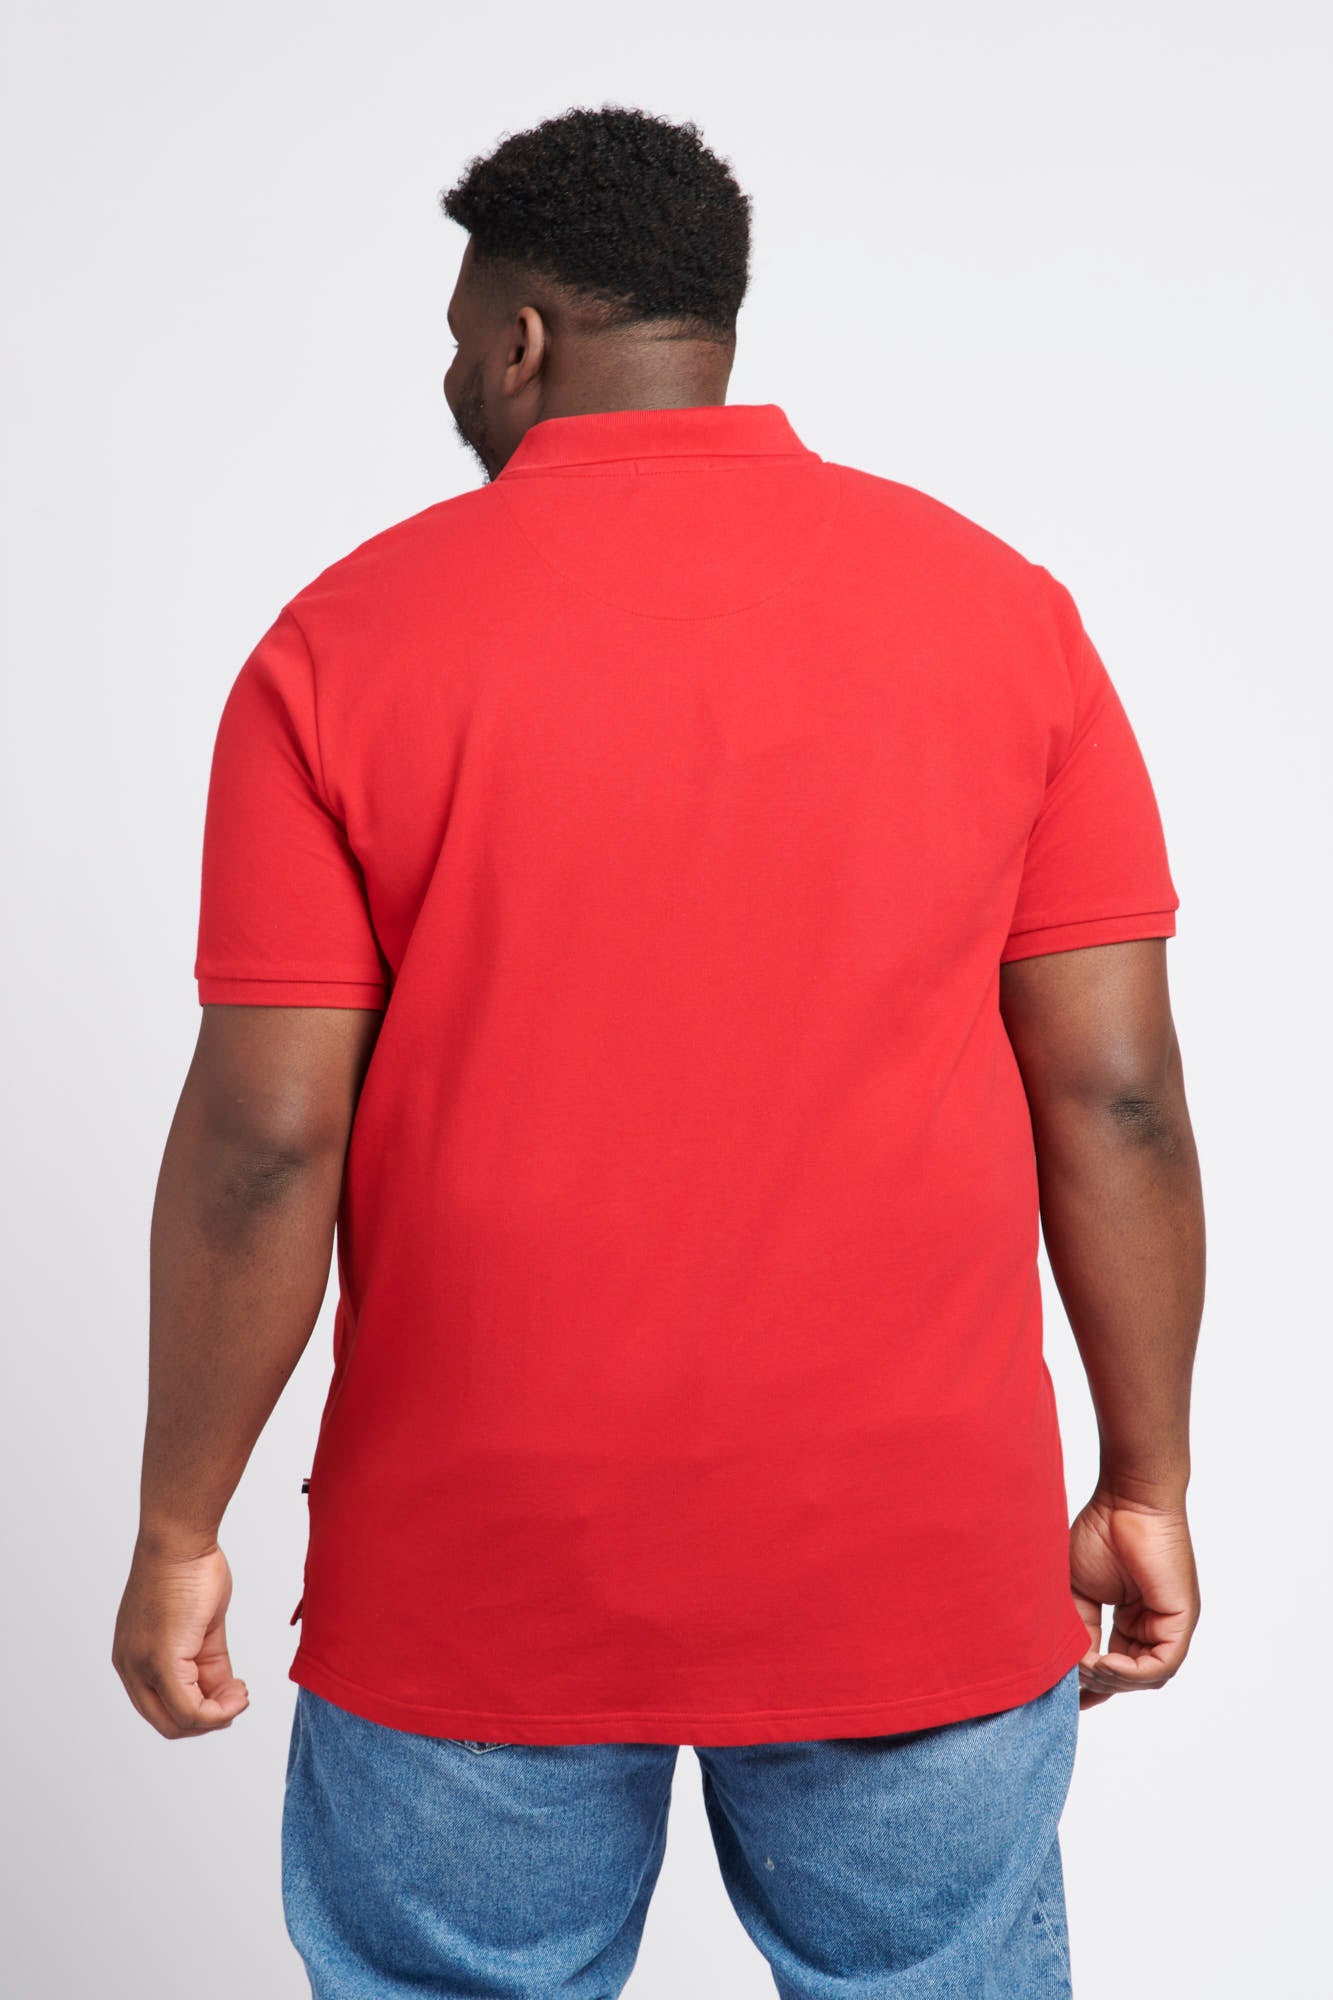 Mens Big & Tall Core Pique Polo Shirt in Haute Red